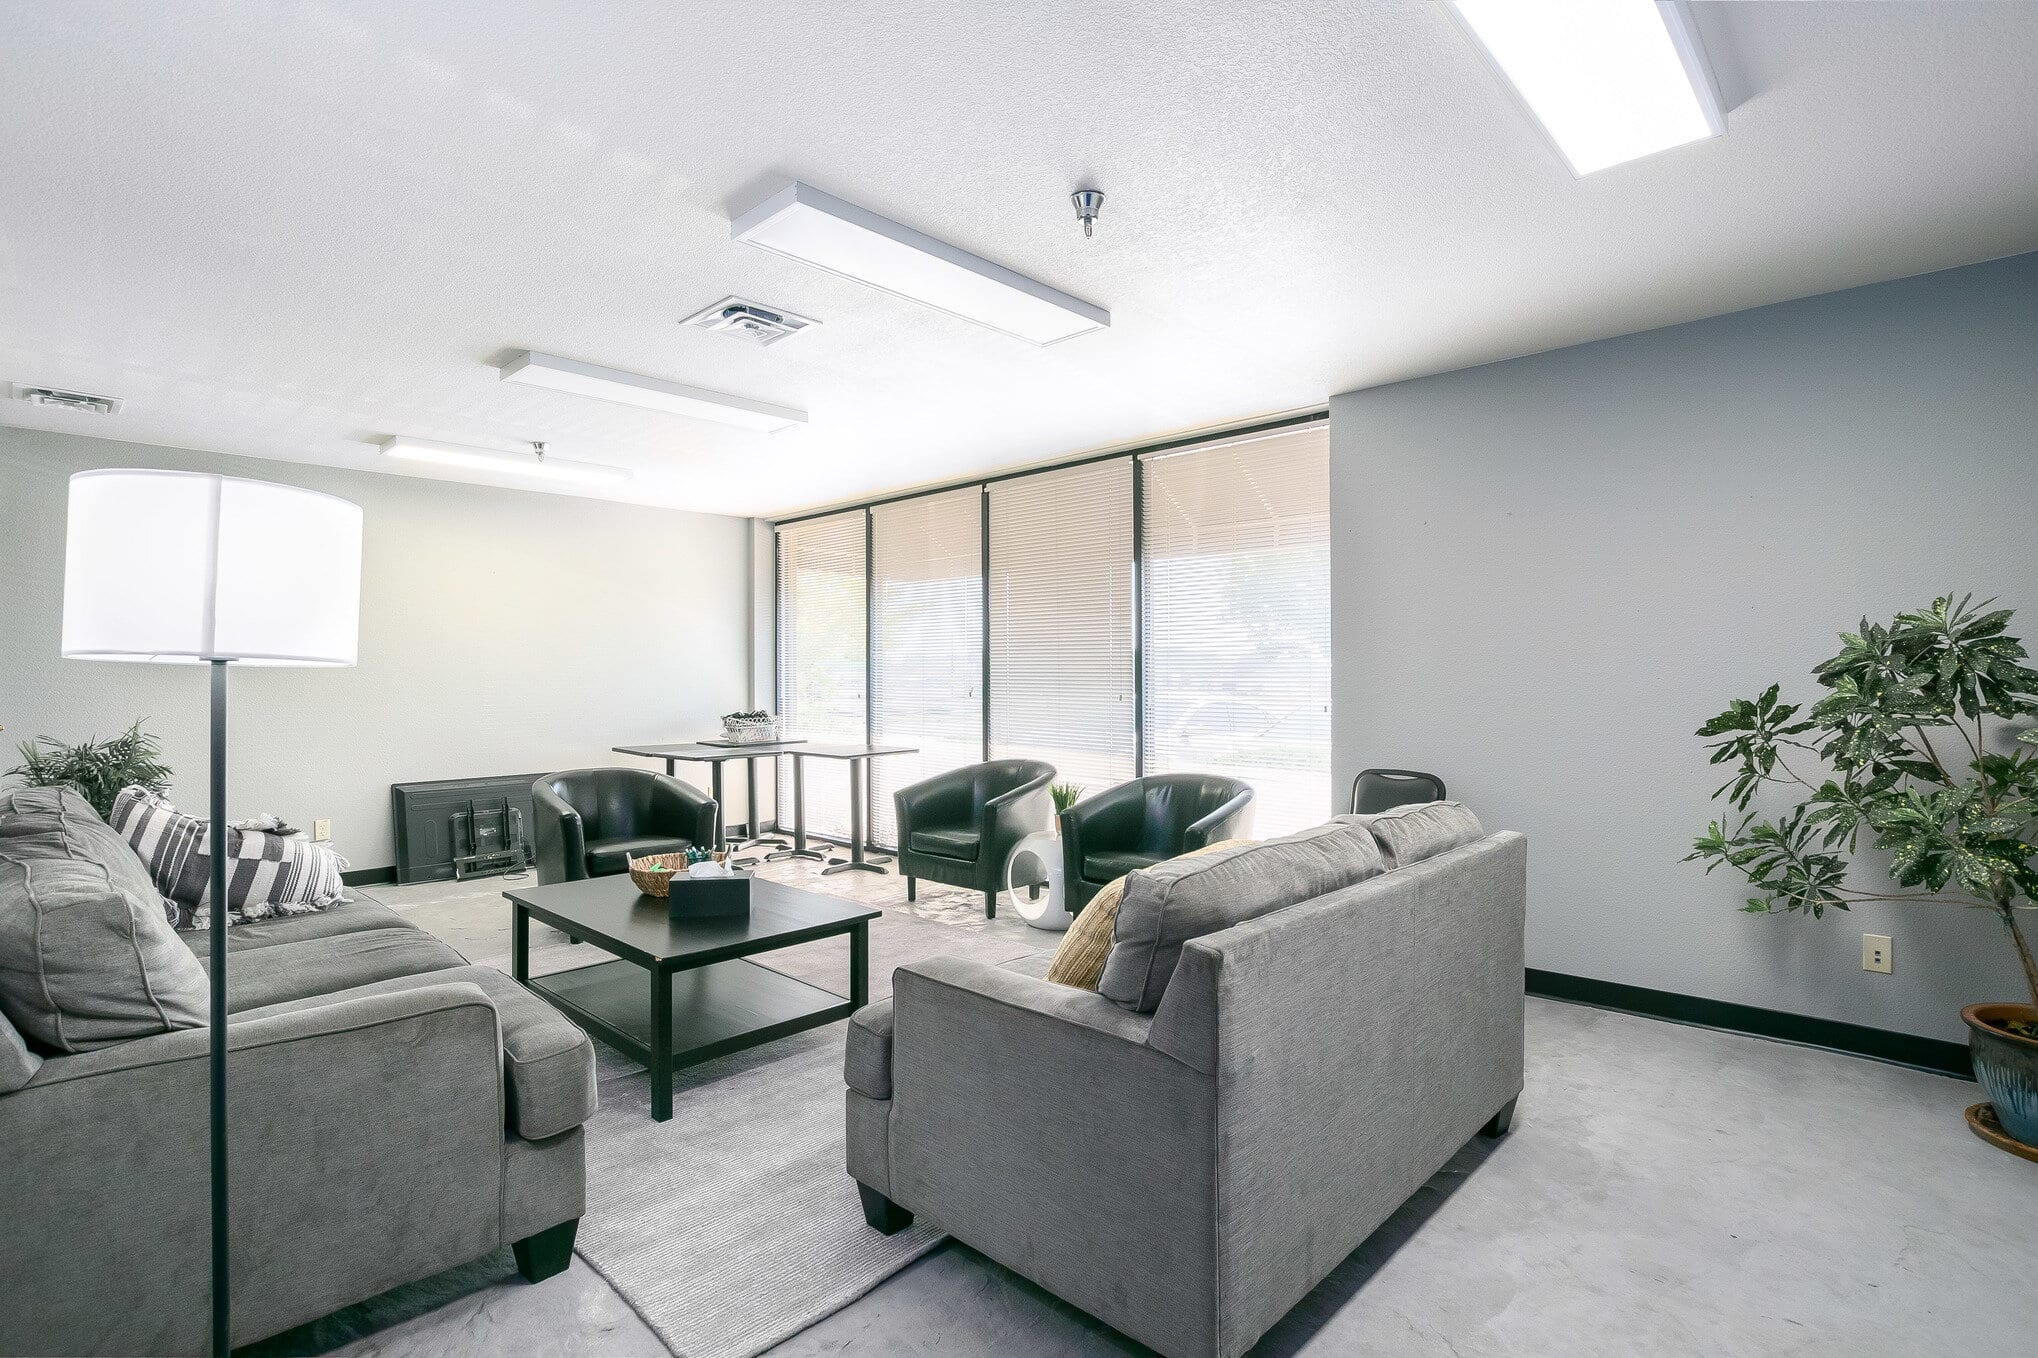 Stylish waiting room with gray couches and black leather chairs